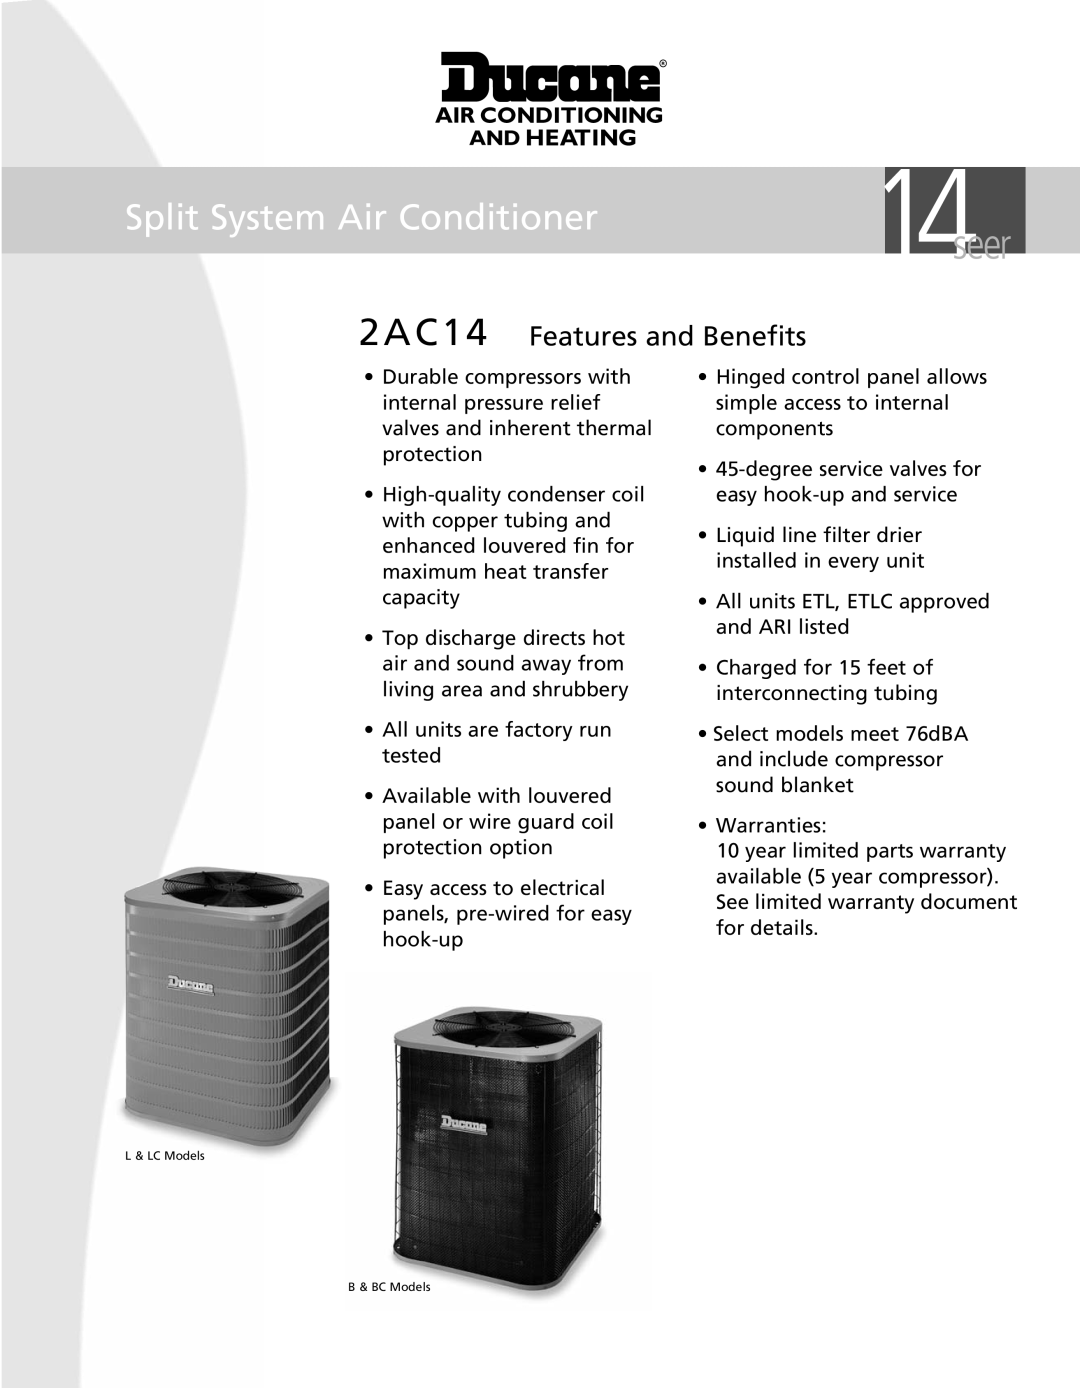 Ducane LC, BC warranty seer, Split System Air Conditioner, 2AC14 Features and Benefits 